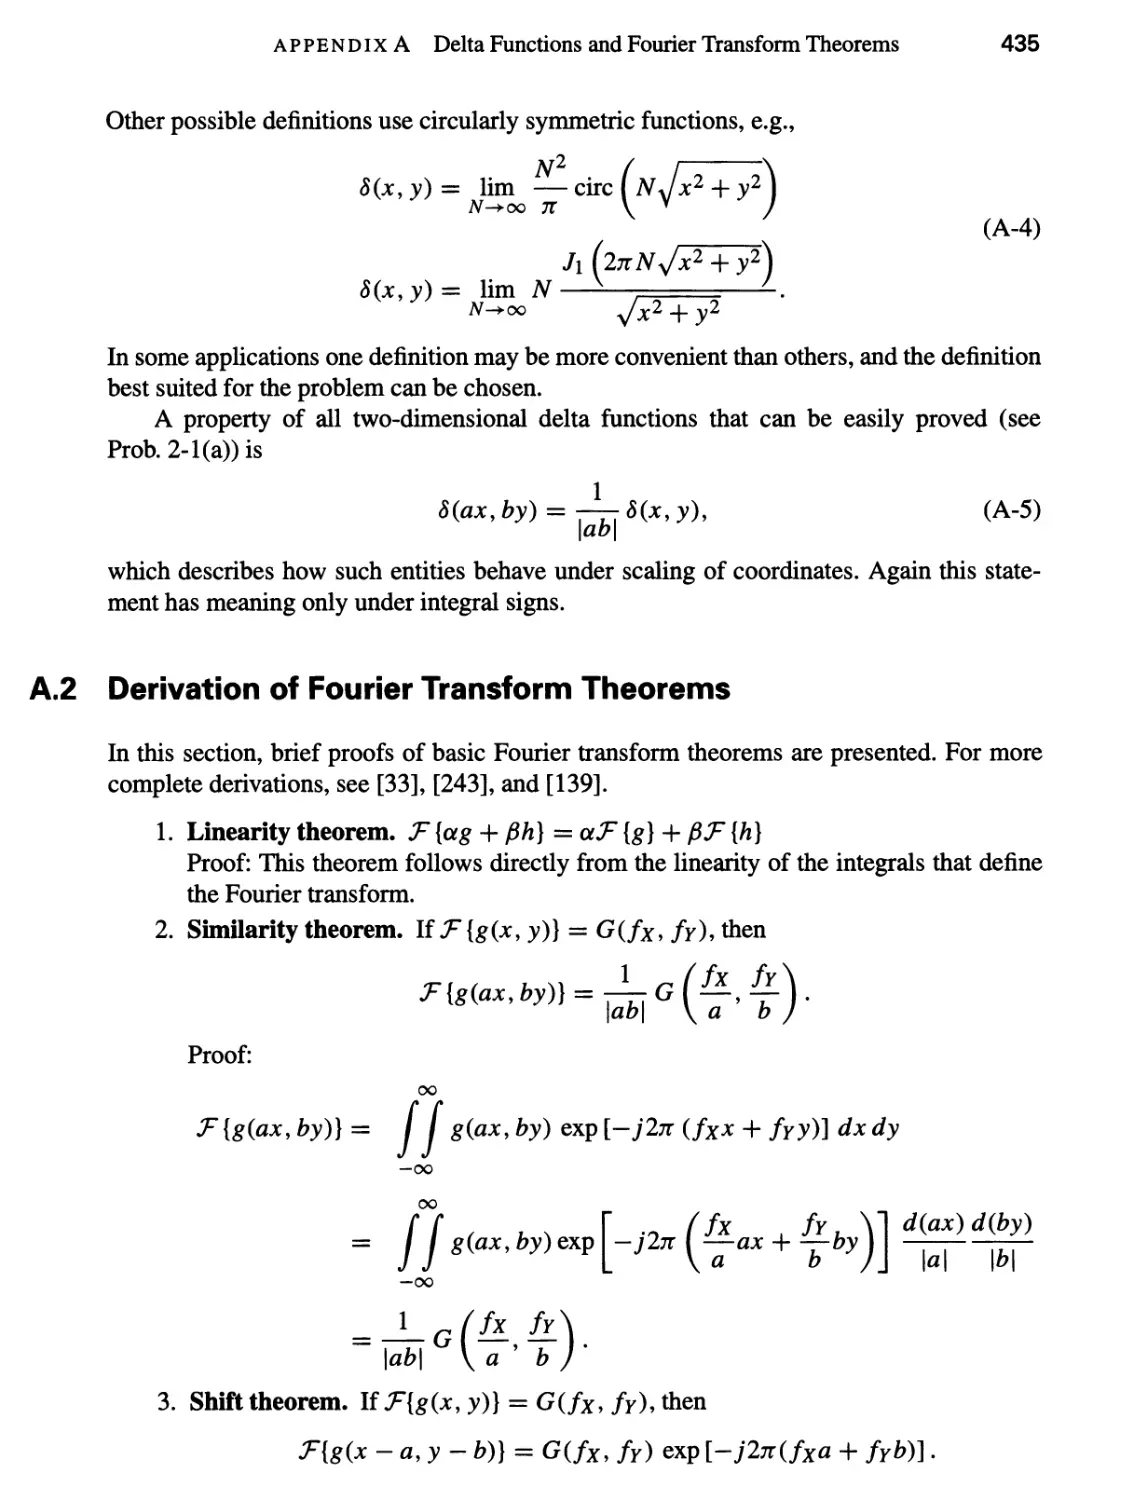 A.2 Derivation of Fourier Transform Theorems 435